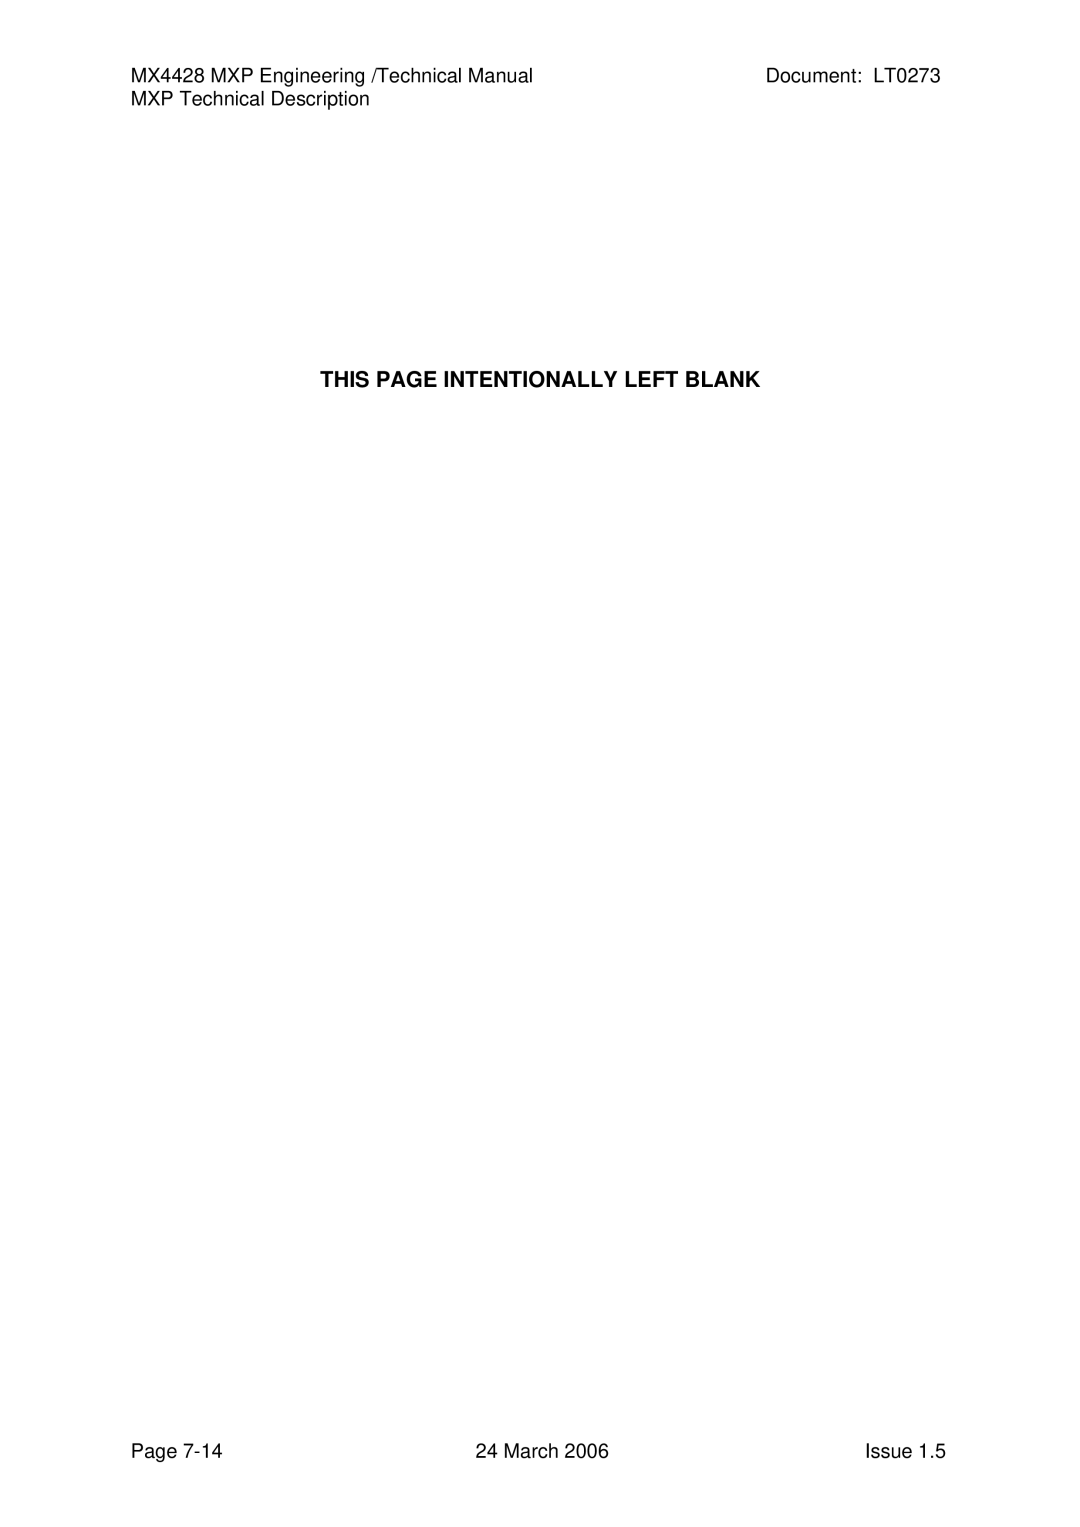 Tyco MX4428 technical manual This page Intentionally Left Blank 